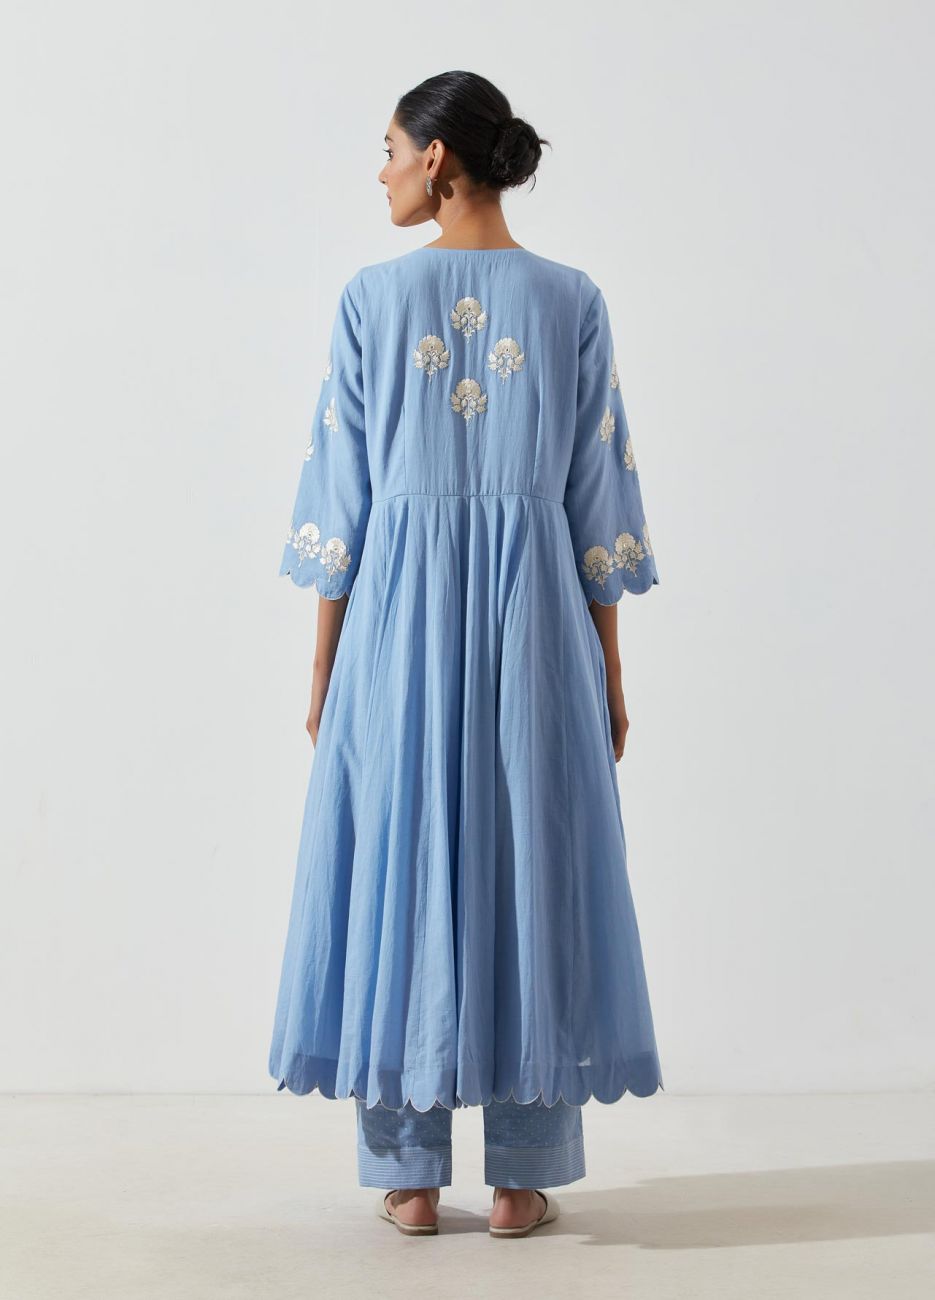 Powder Blue Mogra Kurta Set - Indian Clothing in Denver, CO, Aurora, CO, Boulder, CO, Fort Collins, CO, Colorado Springs, CO, Parker, CO, Highlands Ranch, CO, Cherry Creek, CO, Centennial, CO, and Longmont, CO. Nationwide shipping USA - India Fashion X